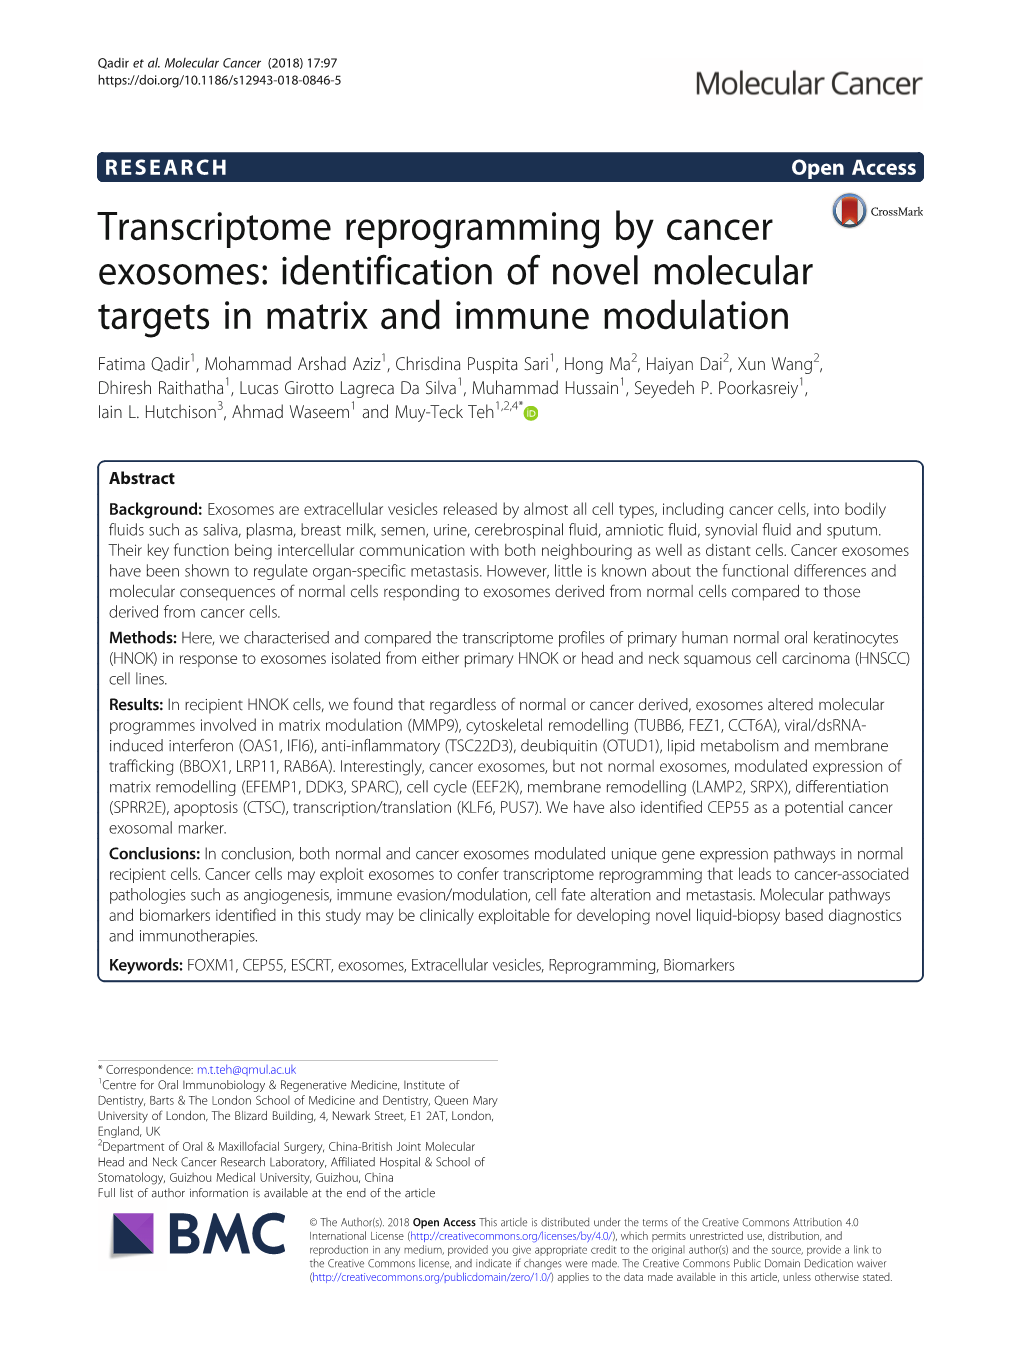 Transcriptome Reprogramming by Cancer Exosomes: Identification of Novel Molecular Targets in Matrix and Immune Modulation